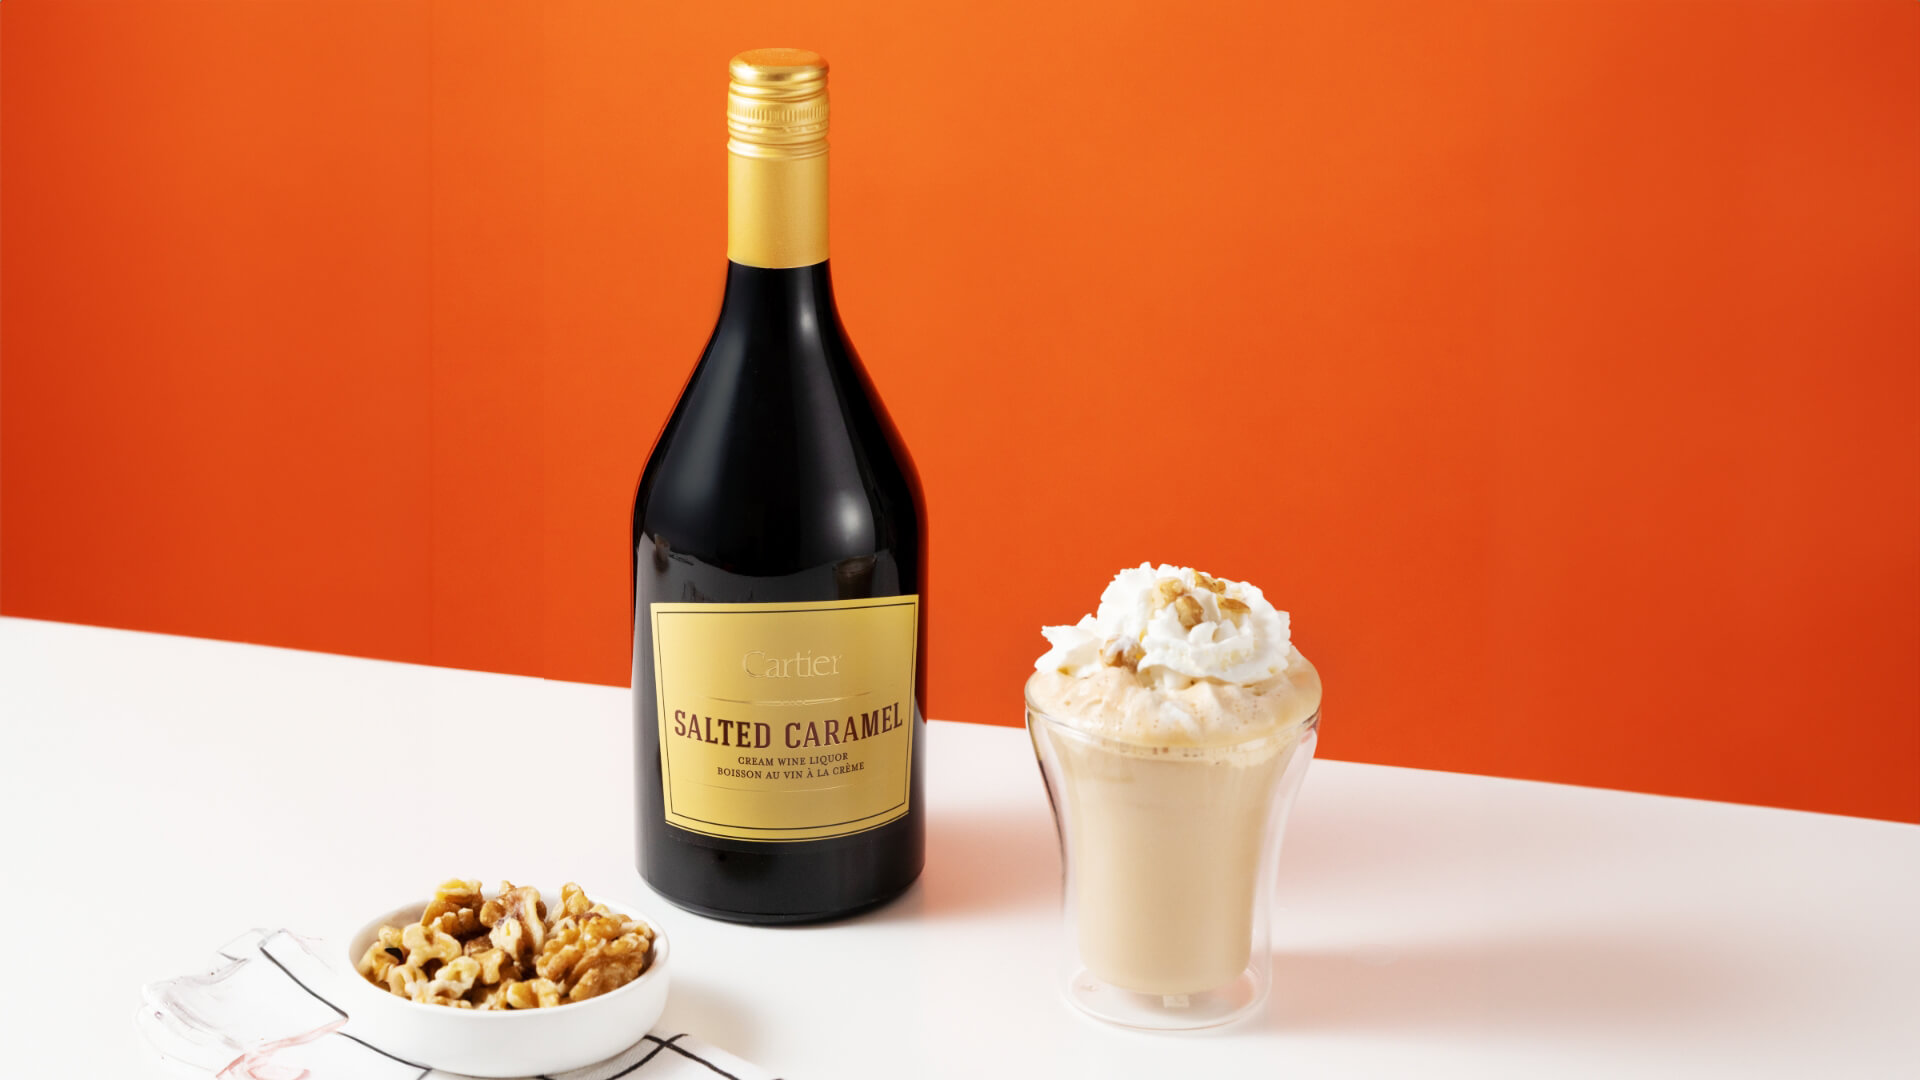 A bottle of Cartier Salted Caramel Irish Cream Wine Liquor with the Caramel Crunch Specialty Coffee.